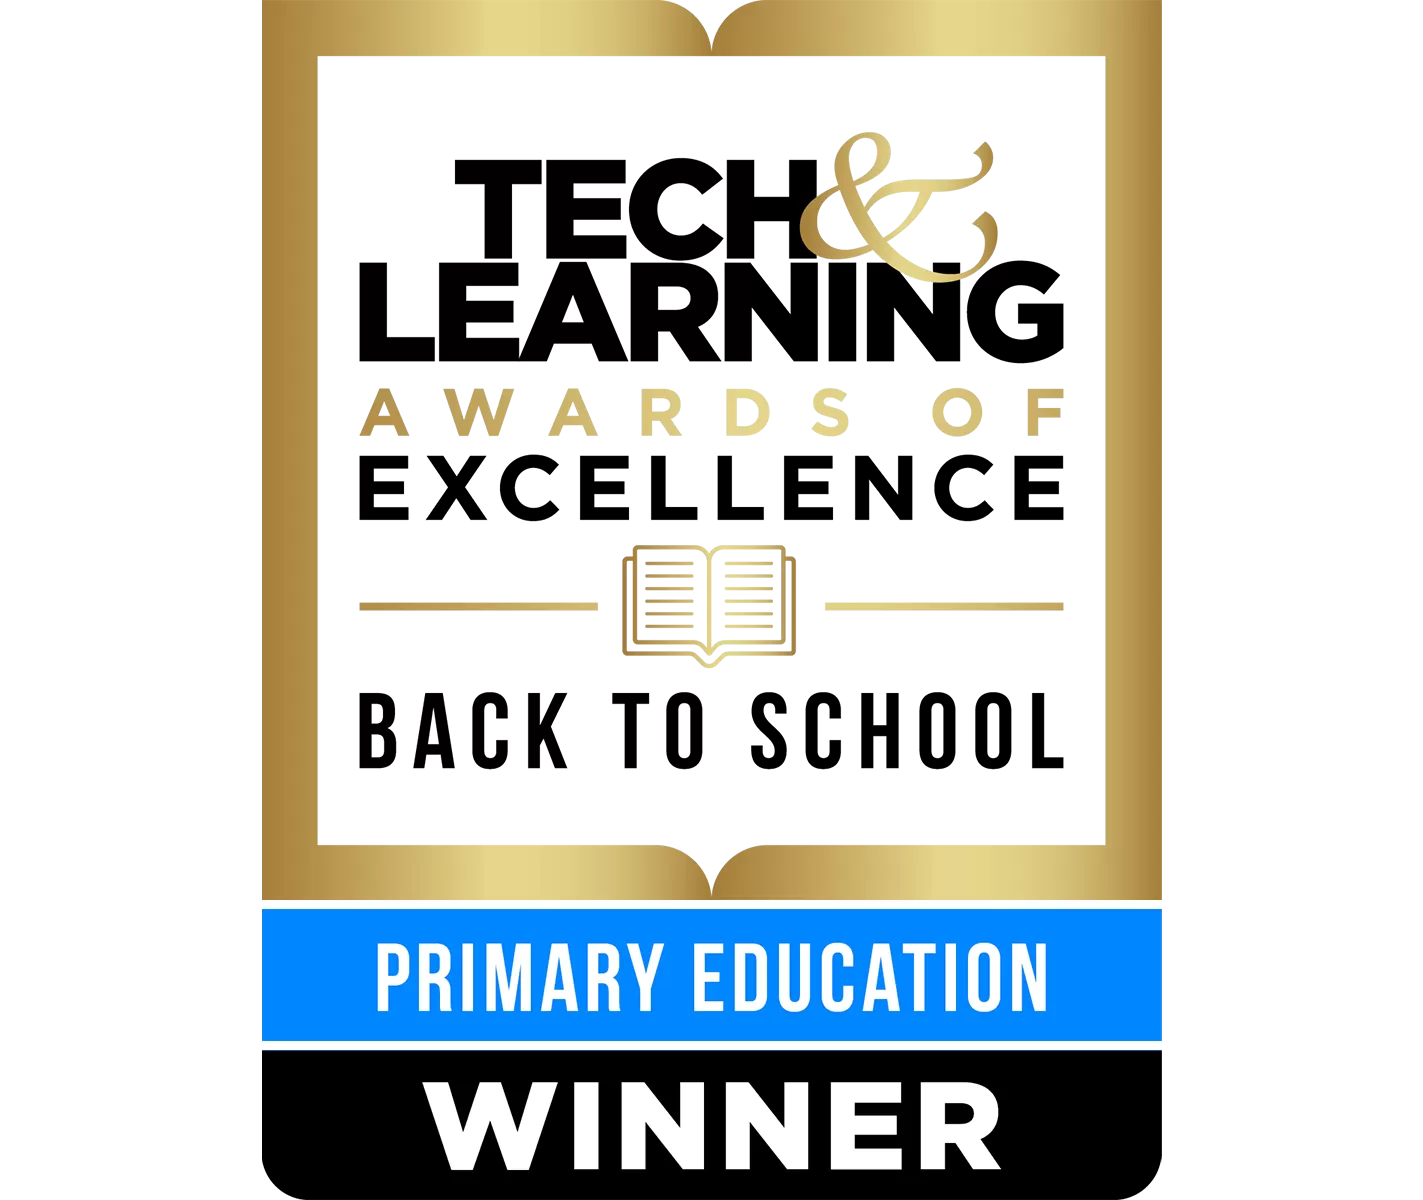 Teach & learning awards of excellence back to school primary education winner badge